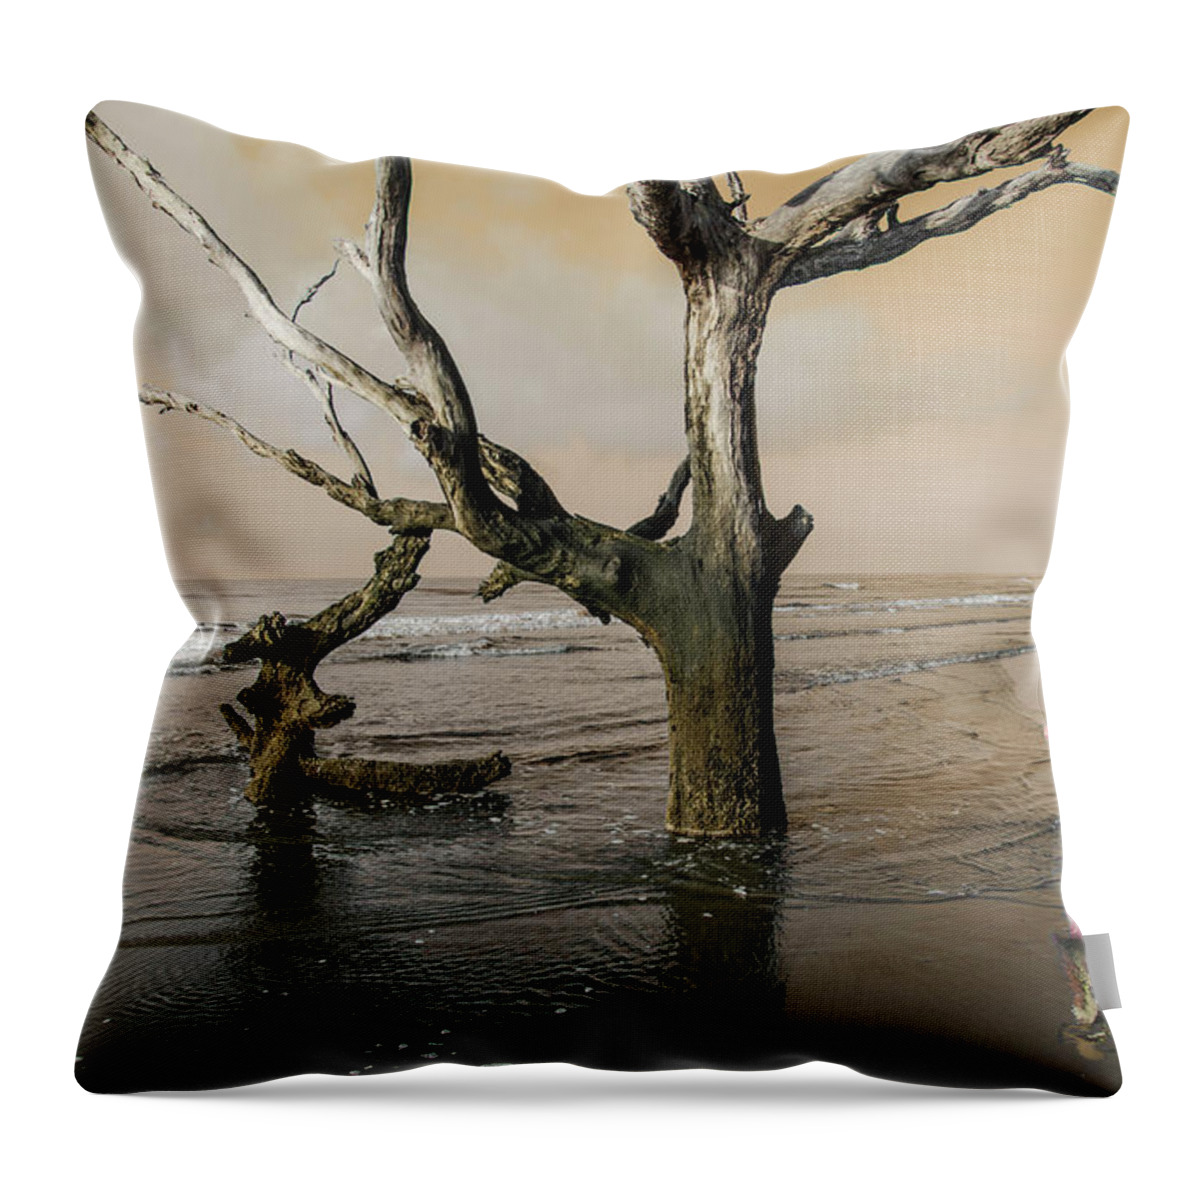 Ocean Throw Pillow featuring the photograph Beachcombing by Jim Cook